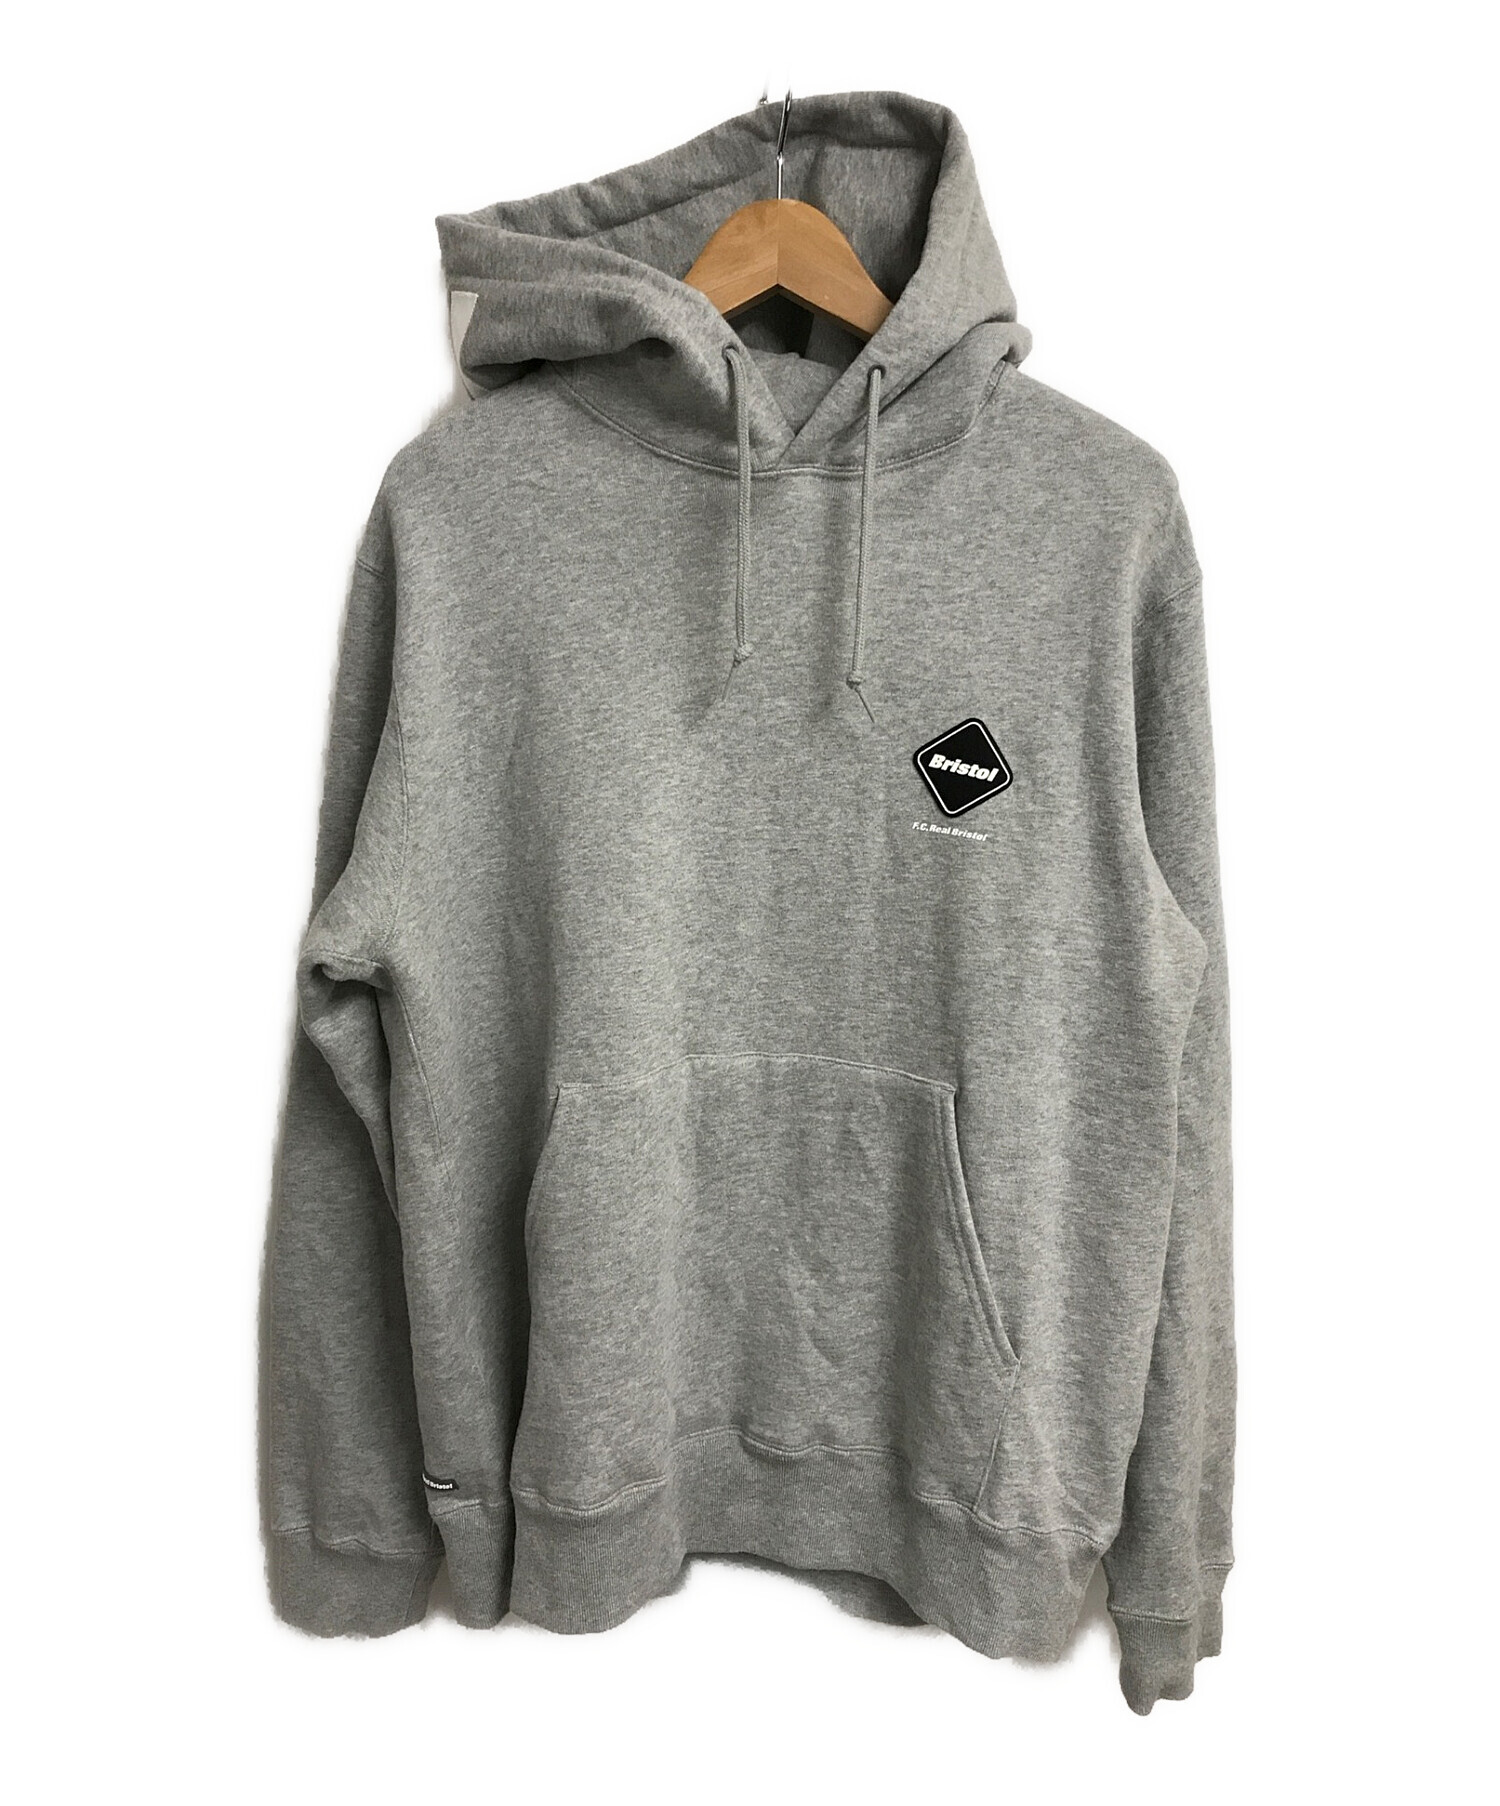 【L】FCRB SWEAT PULLOVER HOODIE グレー